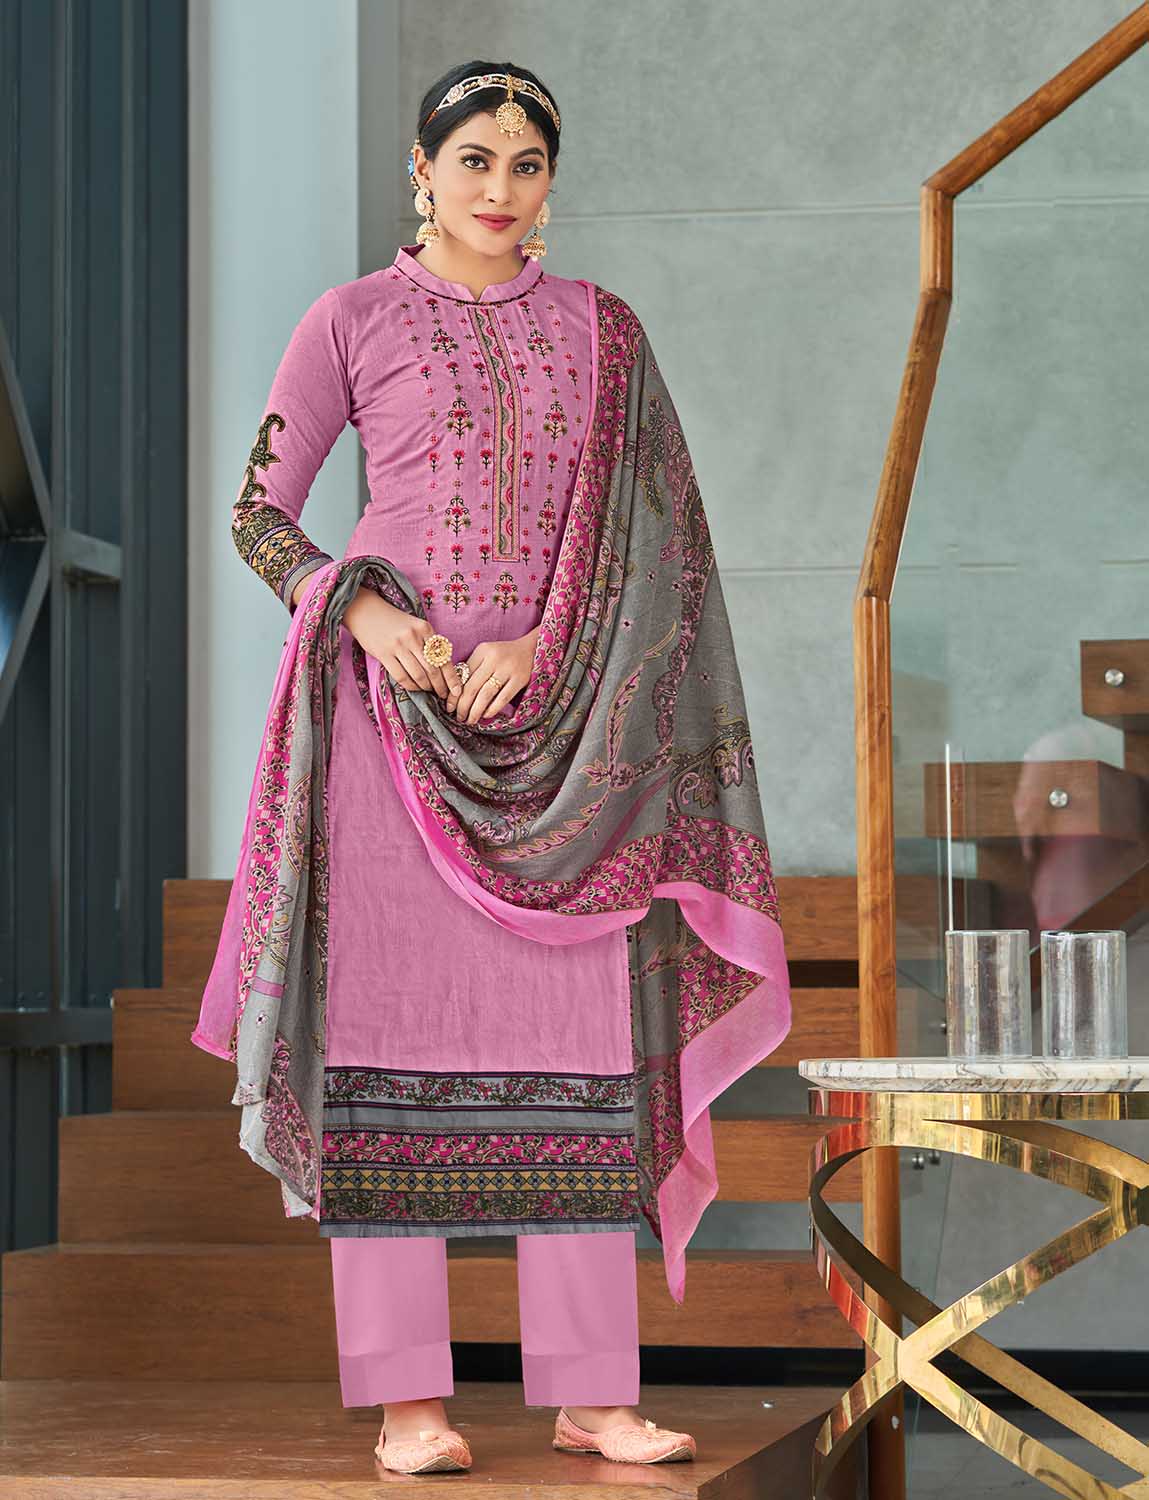 Unstitched Cotton Women Pink Suit Material with Embroidery